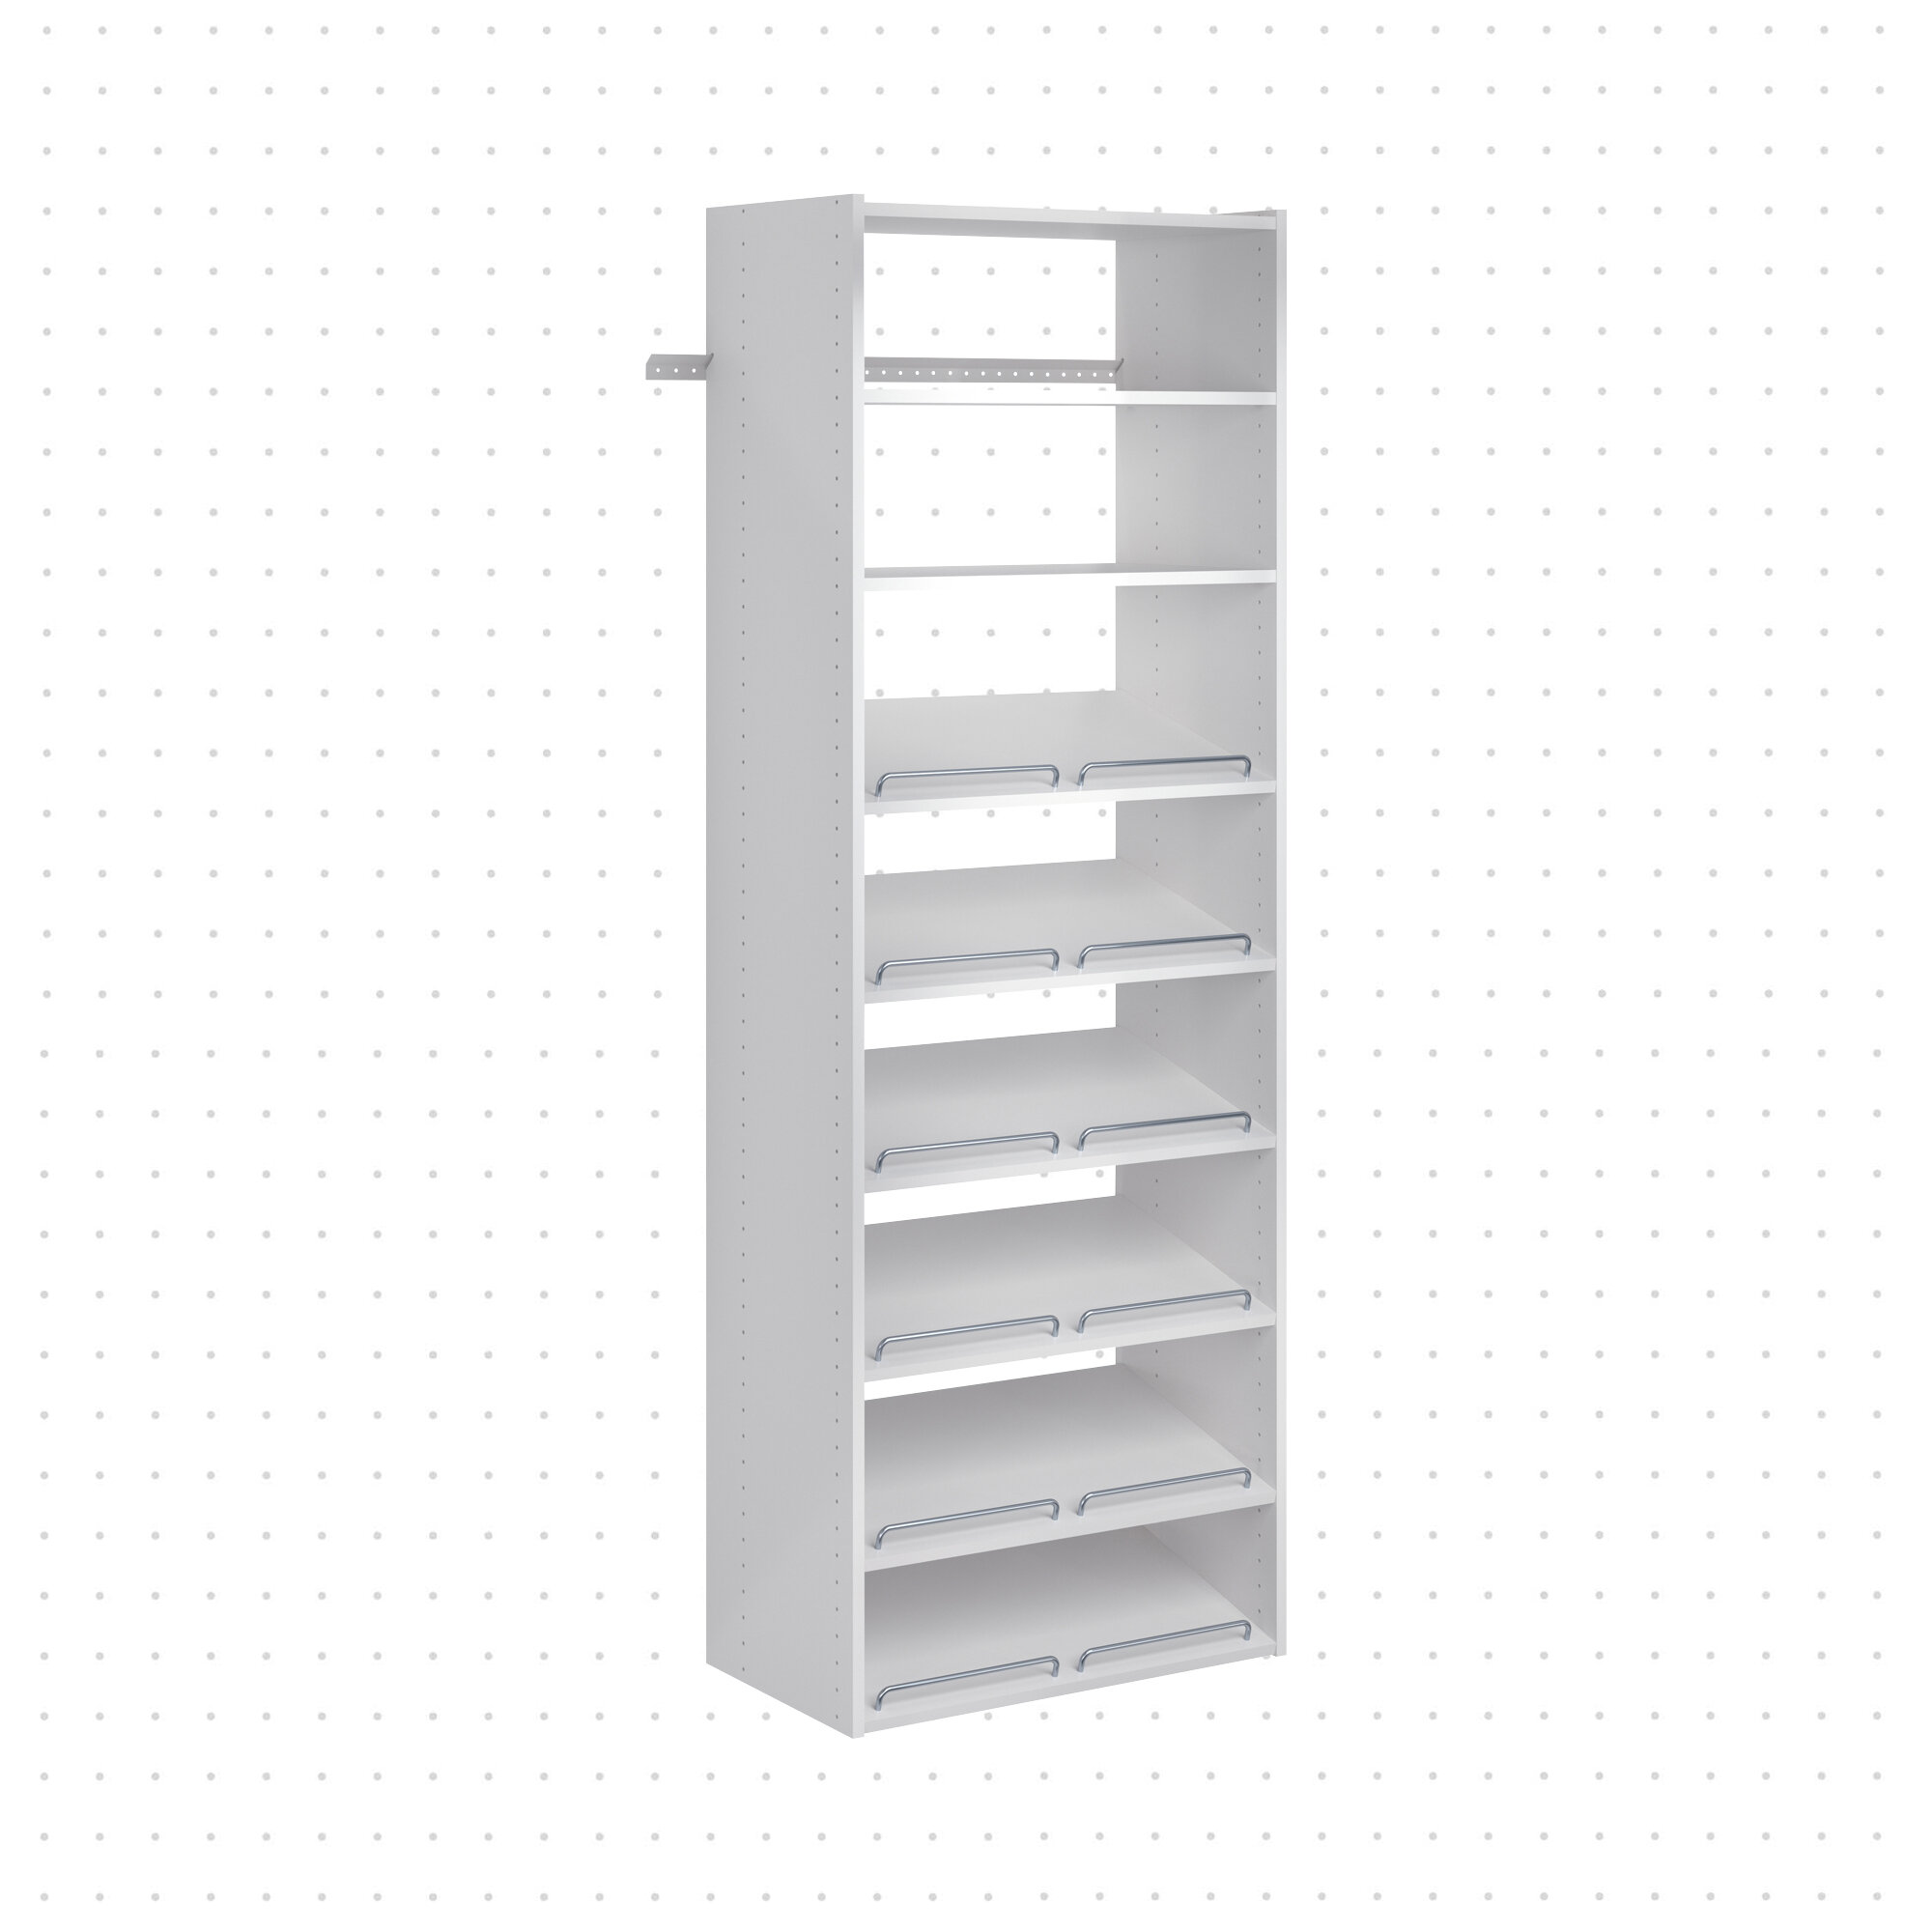 Isa Closet System - Lots of Shelves and Hanging for Walk-In or